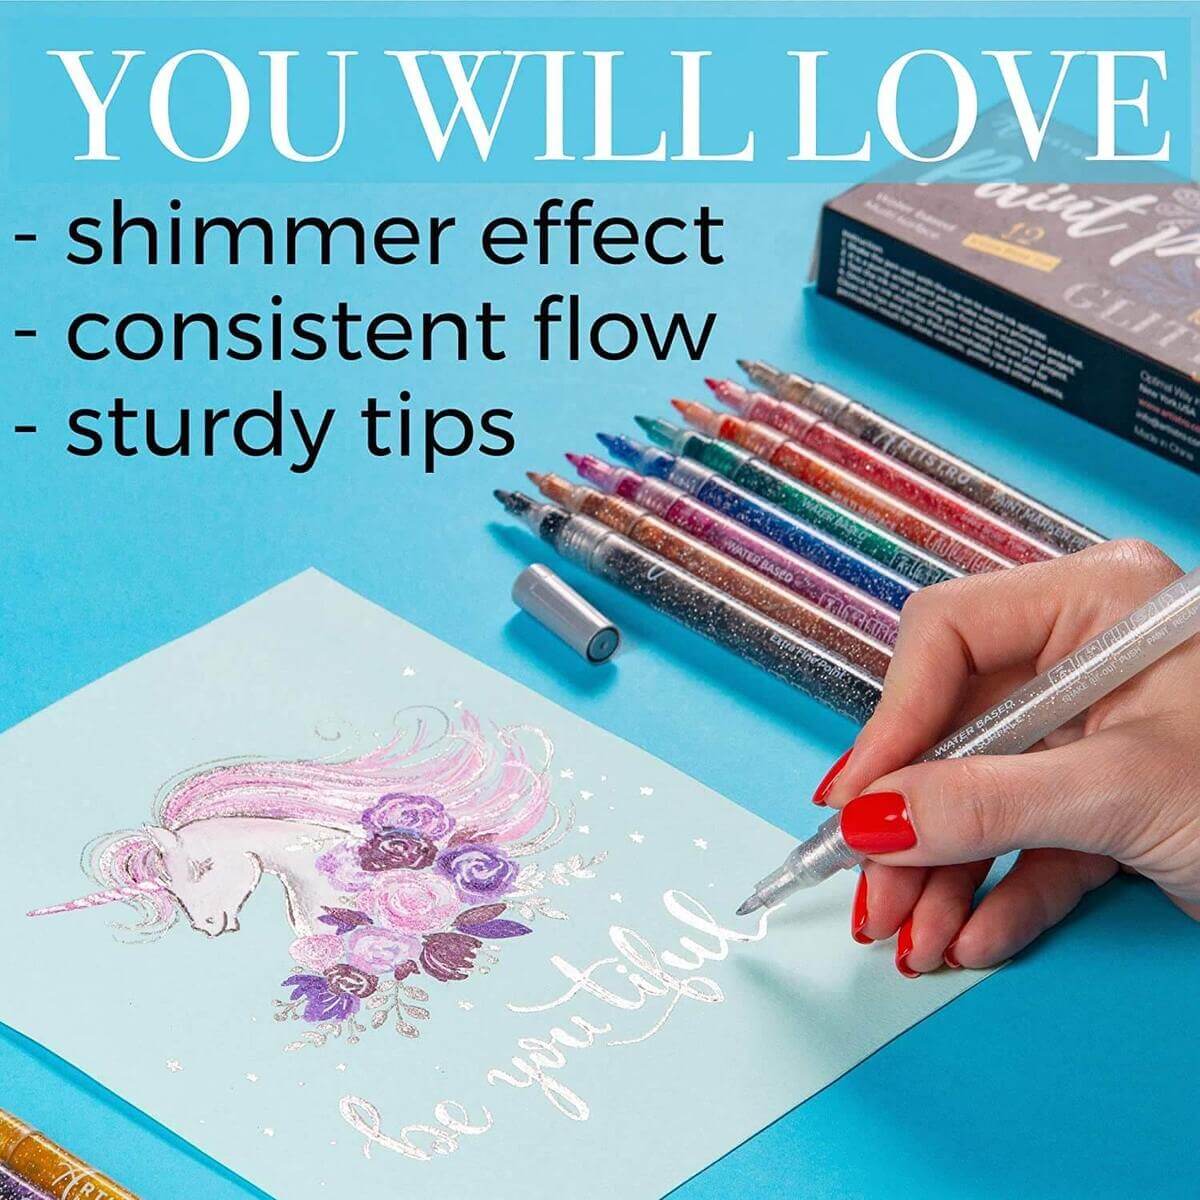 paint pens have shimmer effect, consistent flow, sturdy tips